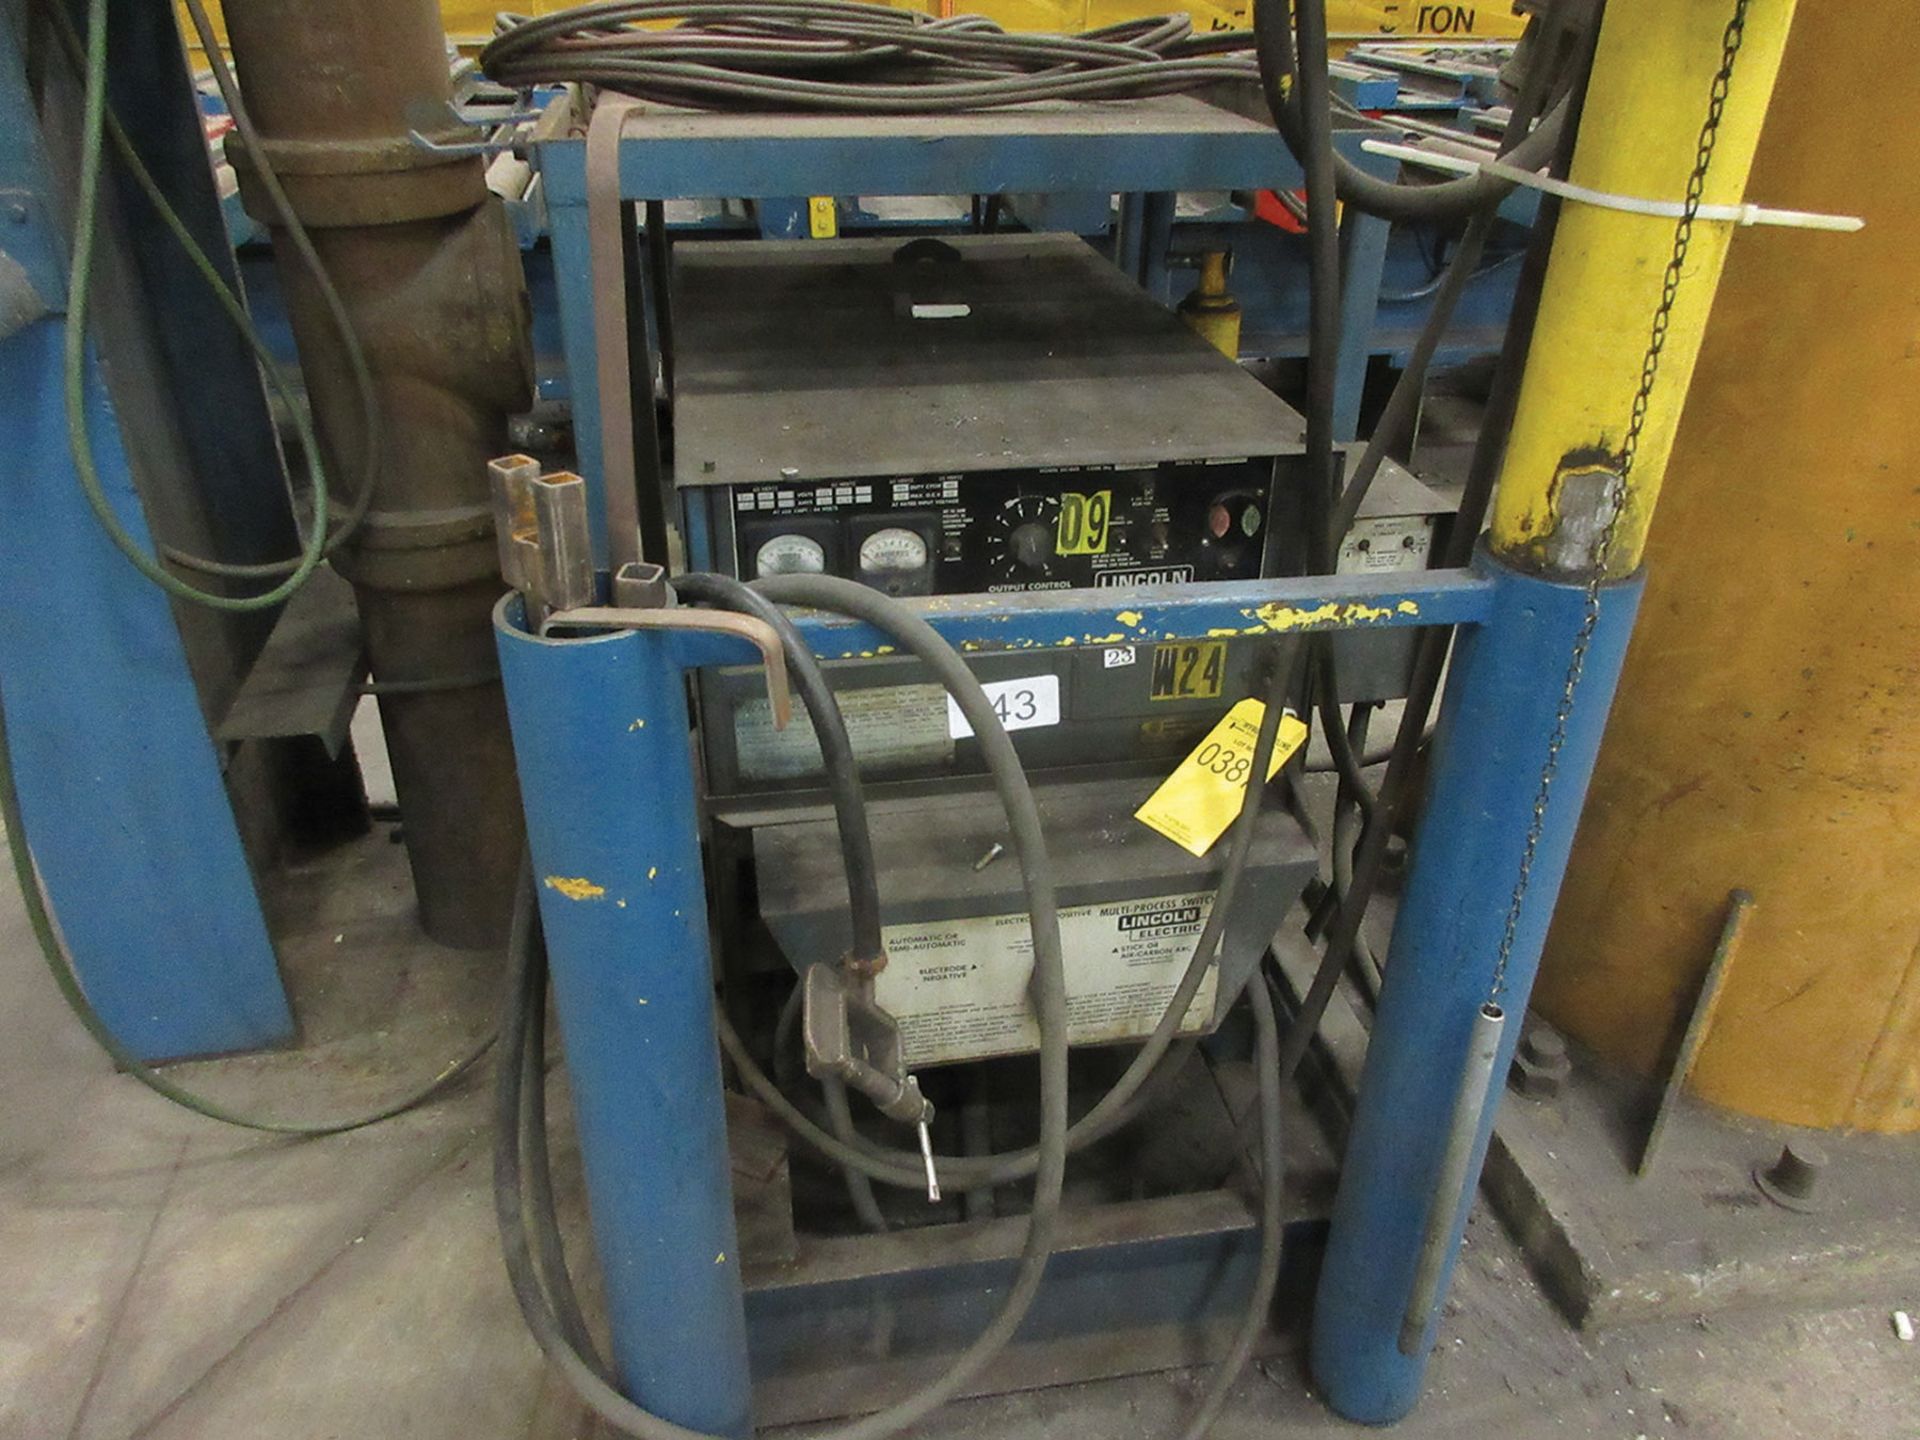 LINCOLN ELECTRIC IDEALARC DC-600 ARC WELDER WITH LINCOLN LN-9FH WIRE FEEDER; S/N AC537249 AND JB